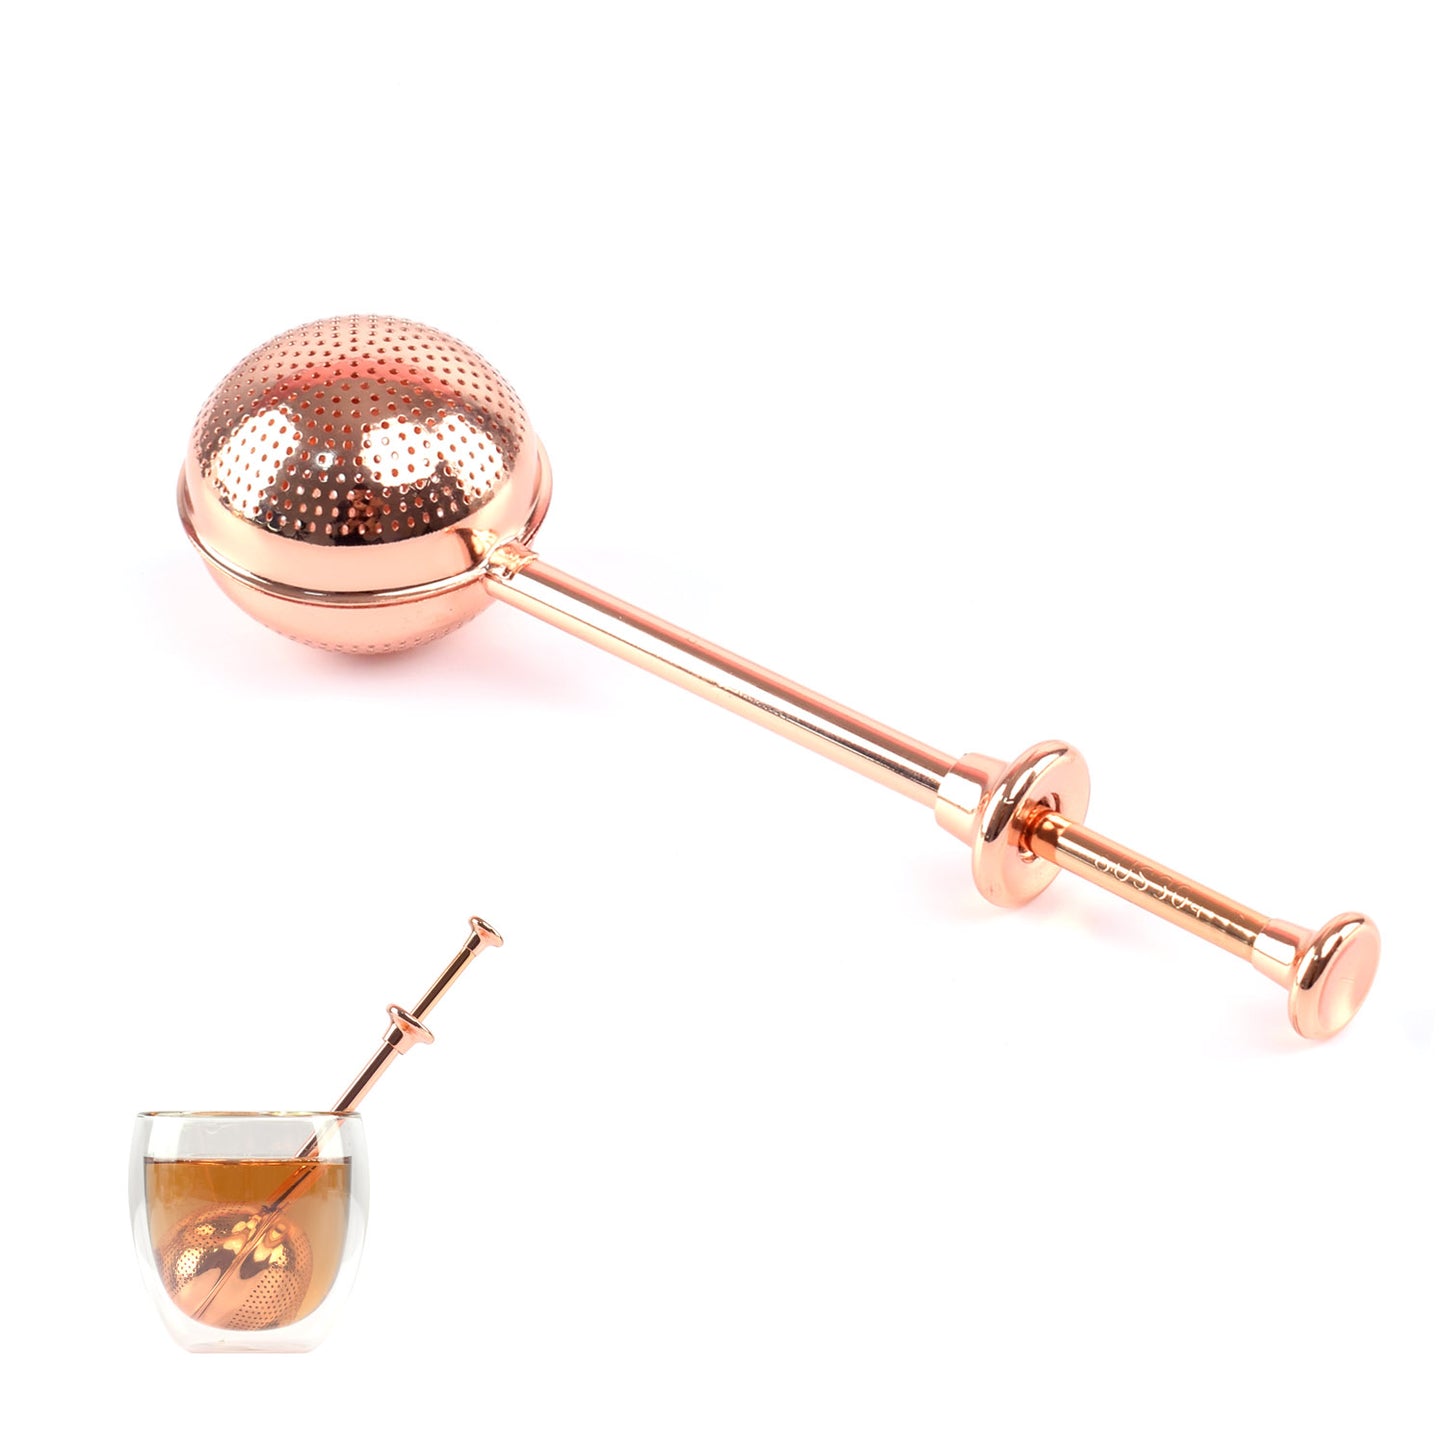 Good Karma tea infuser ball scoop and a strainer rose gold color